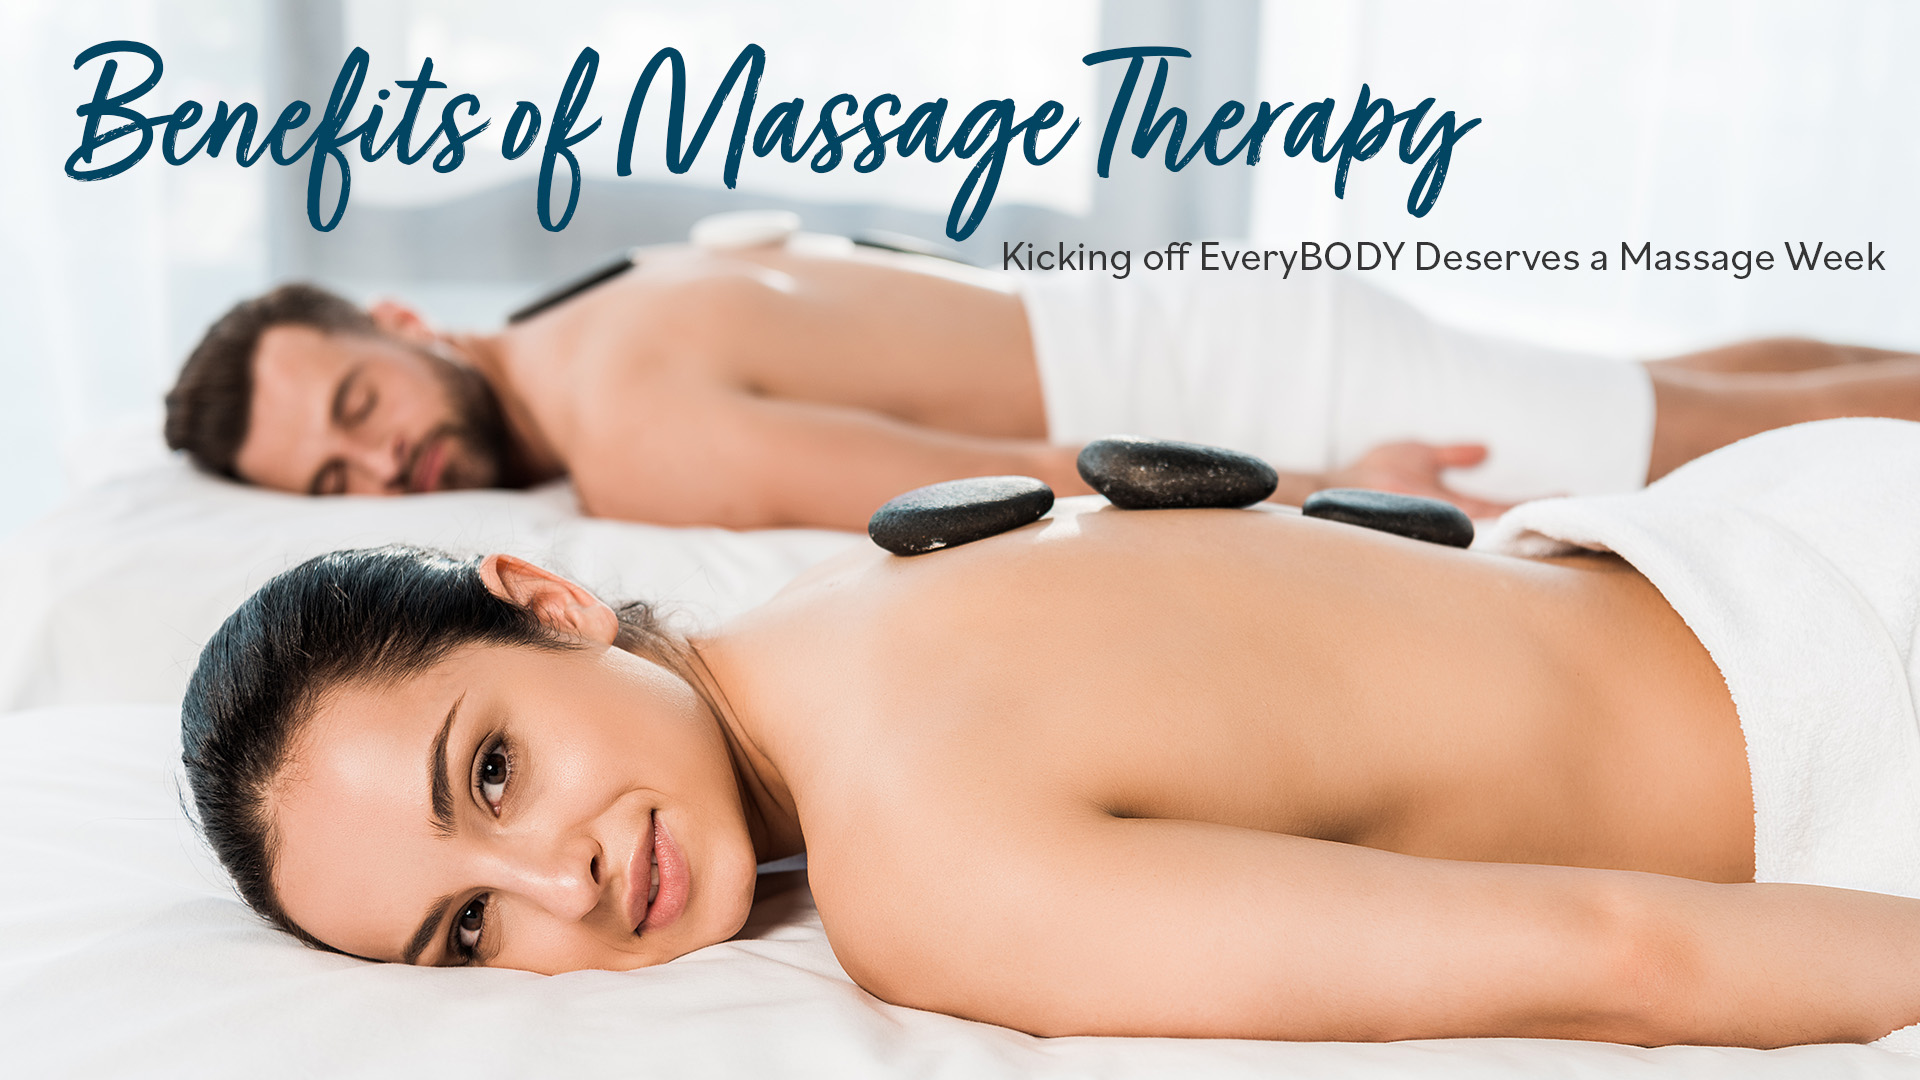 Benefits of massage therapy. Kicking off everybody deserves a massage week.